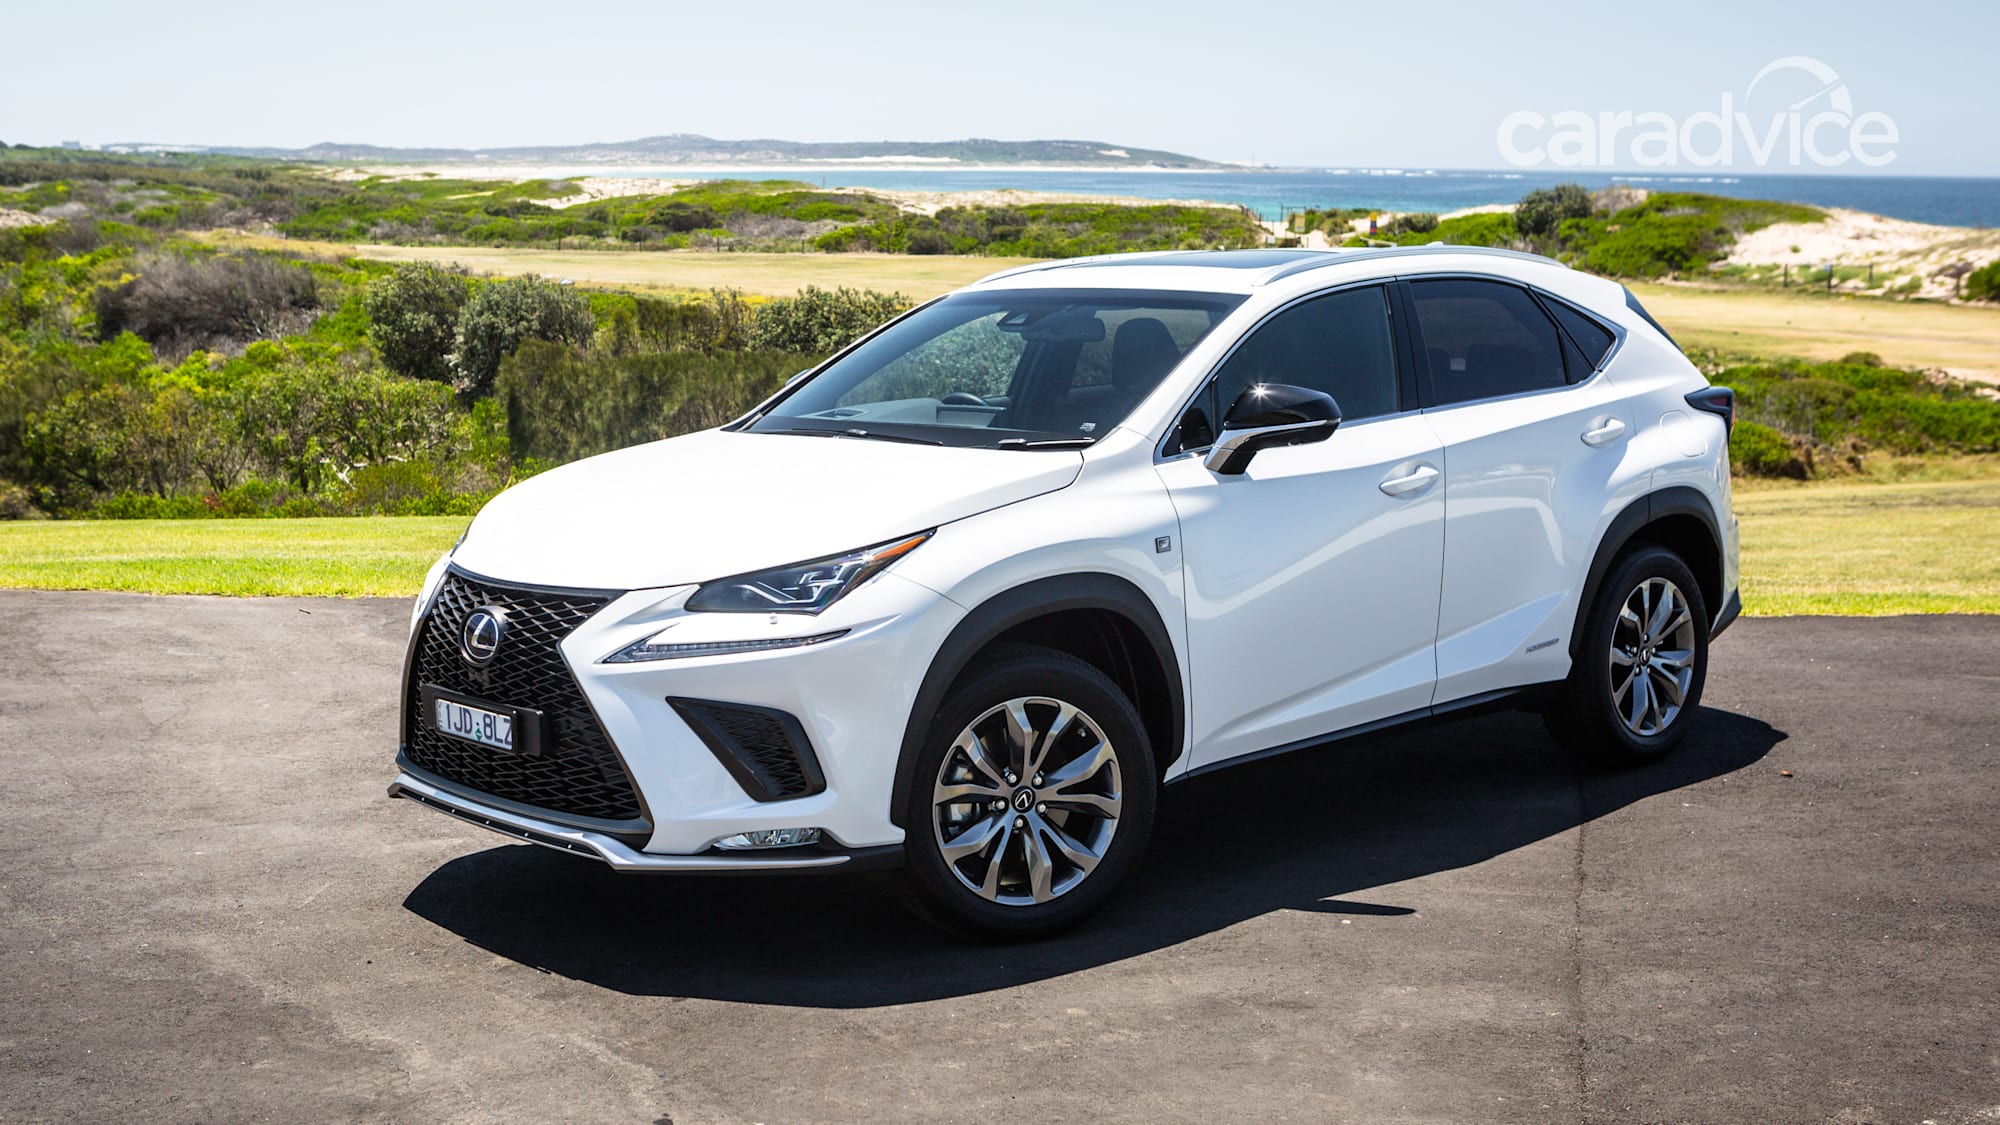 2018 Lexus NX300h 2WD F Sport review CarAdvice